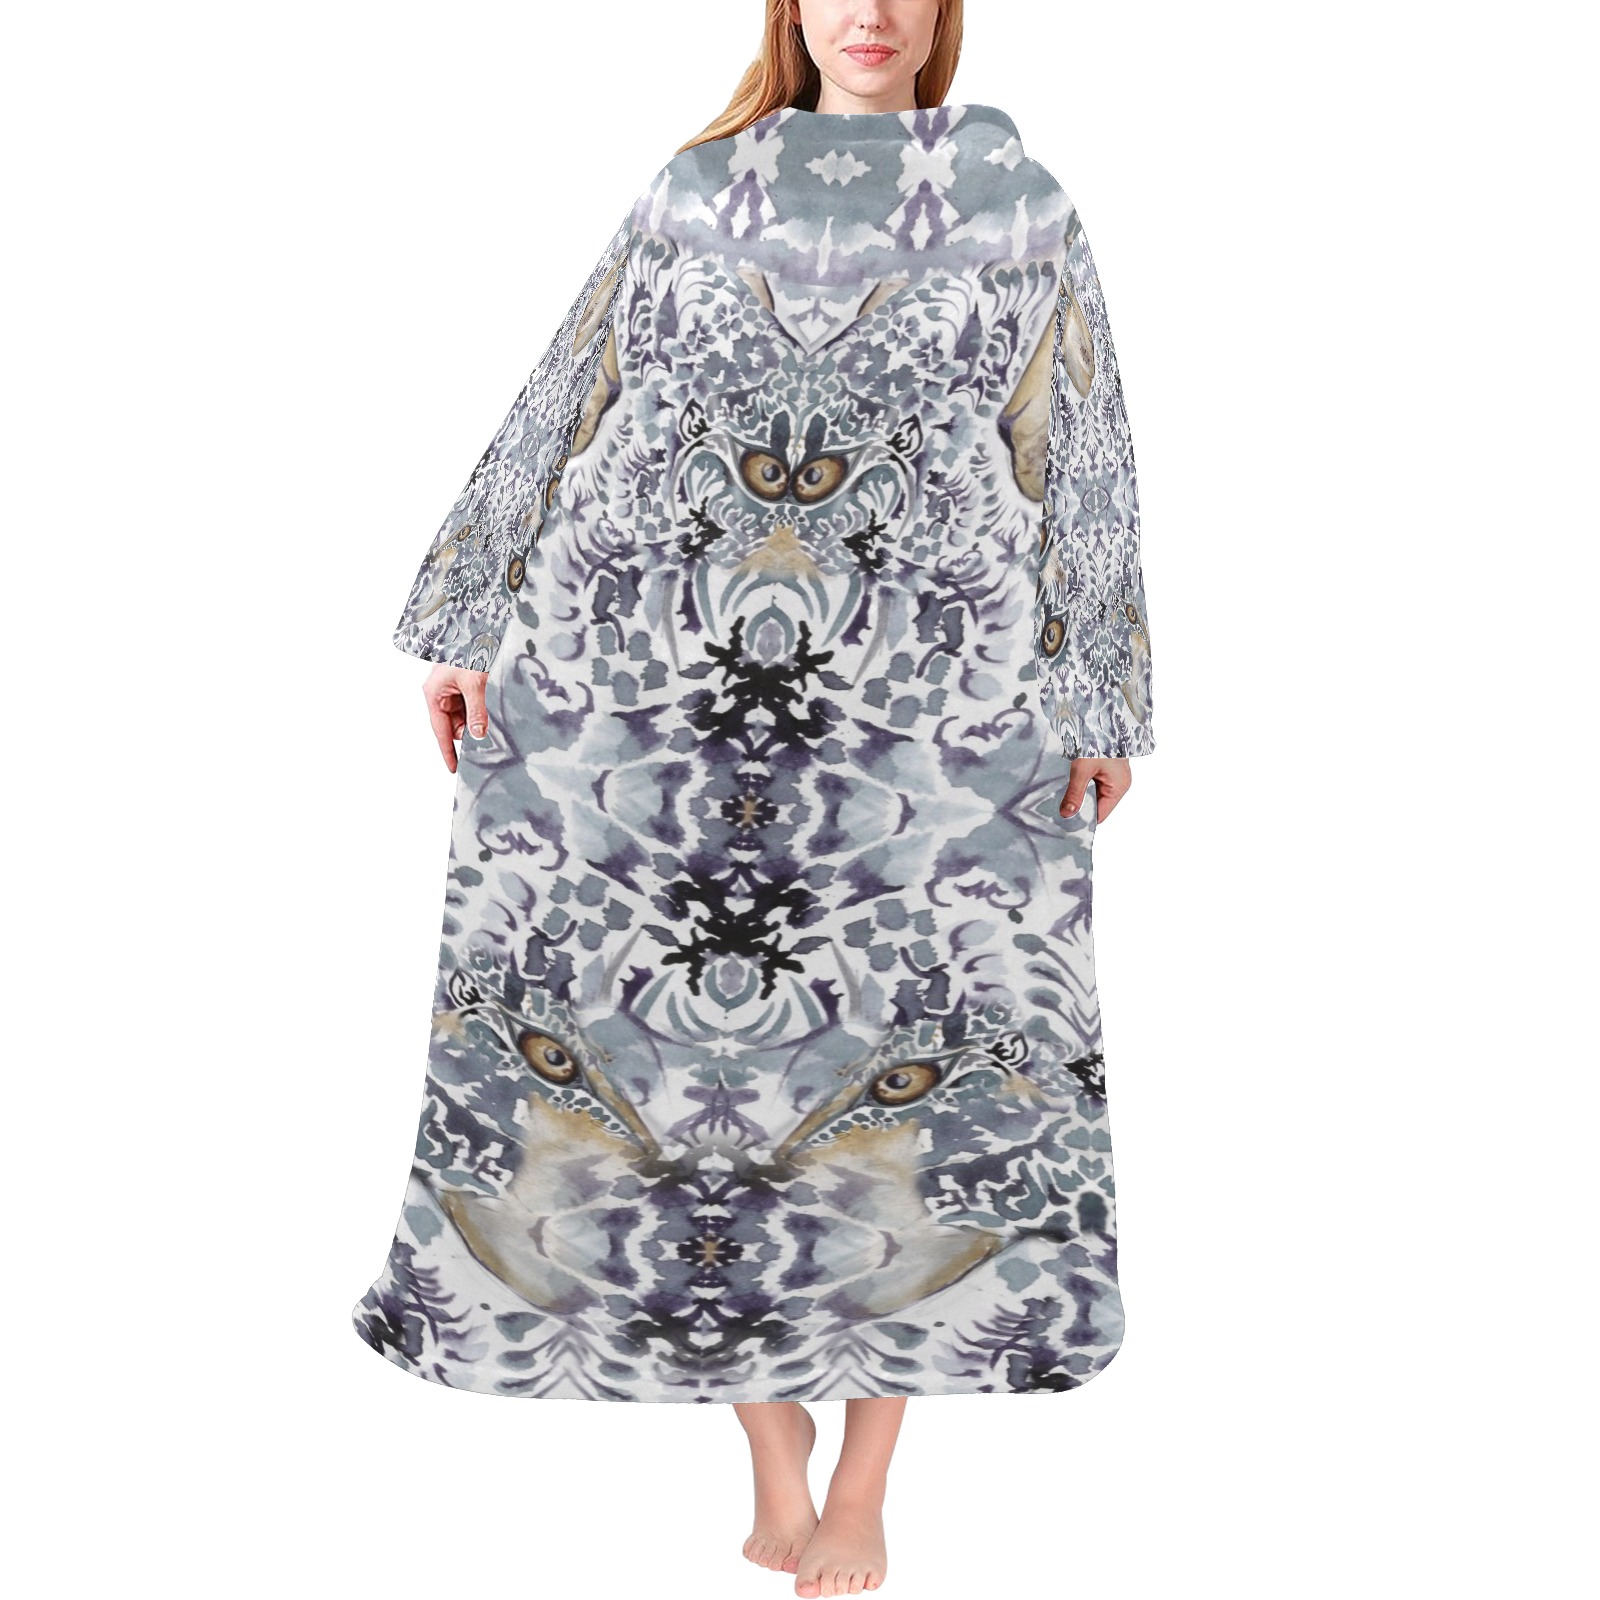 Nidhi December 2014-pattern 4-gray-44x55inches Blanket Robe with Sleeves for Adults